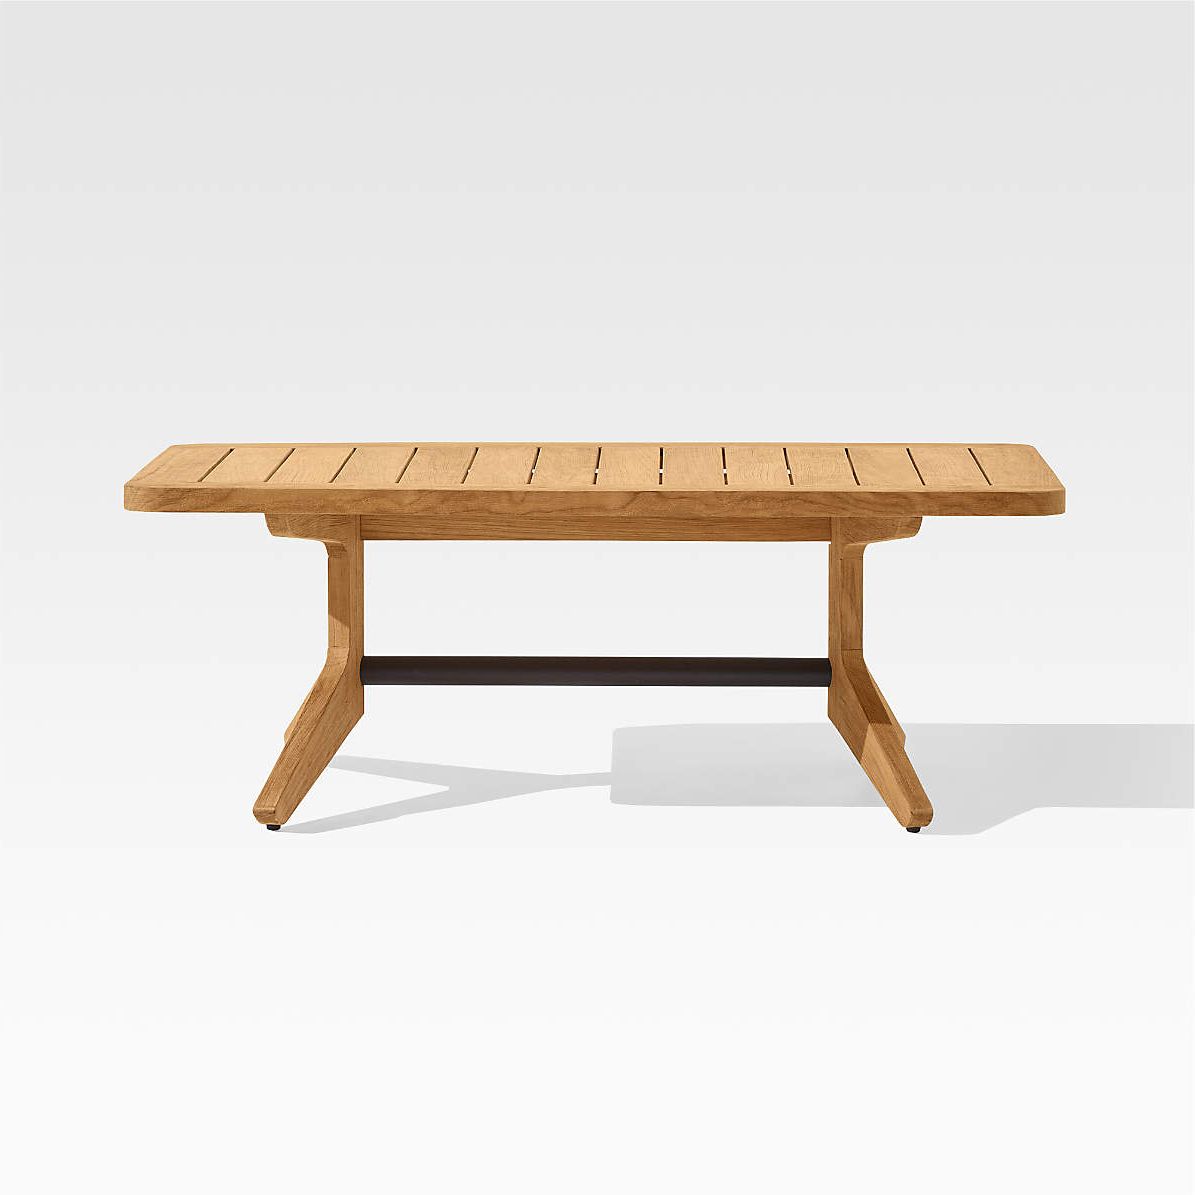 Teak Outdoor Tables For Famous Kinney Teak Wood Outdoor Patio Coffee Table + Reviews (View 7 of 15)